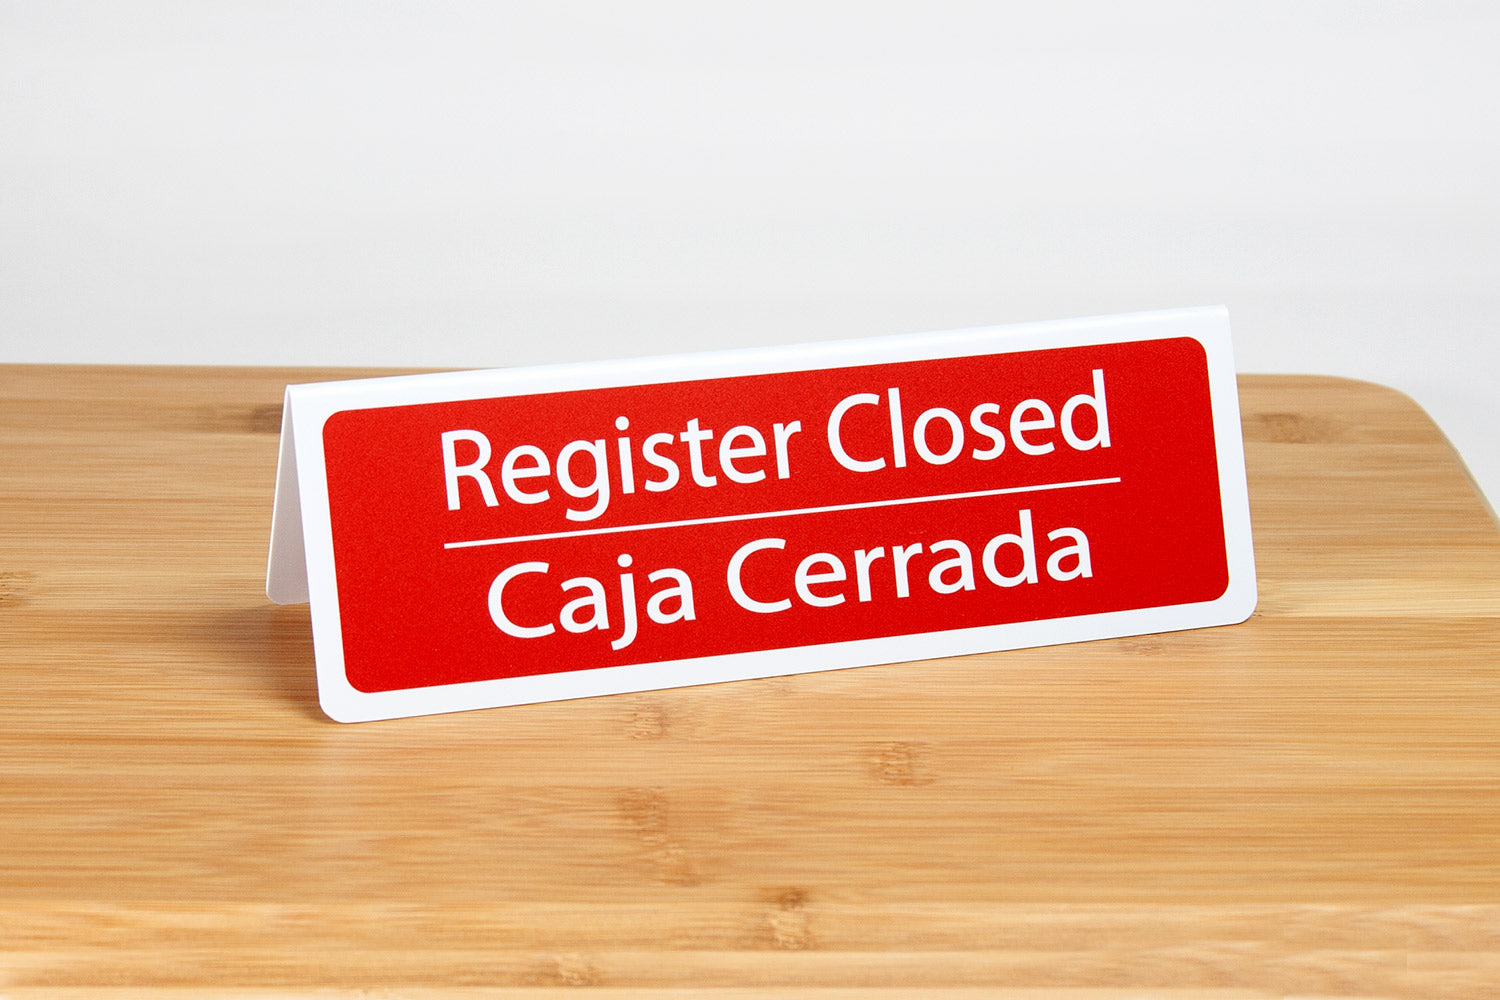 Register closed tent style signs are ideal for use in grocery stores, c-stores or any retail environment. Register closed is printed in both english and spanish text.